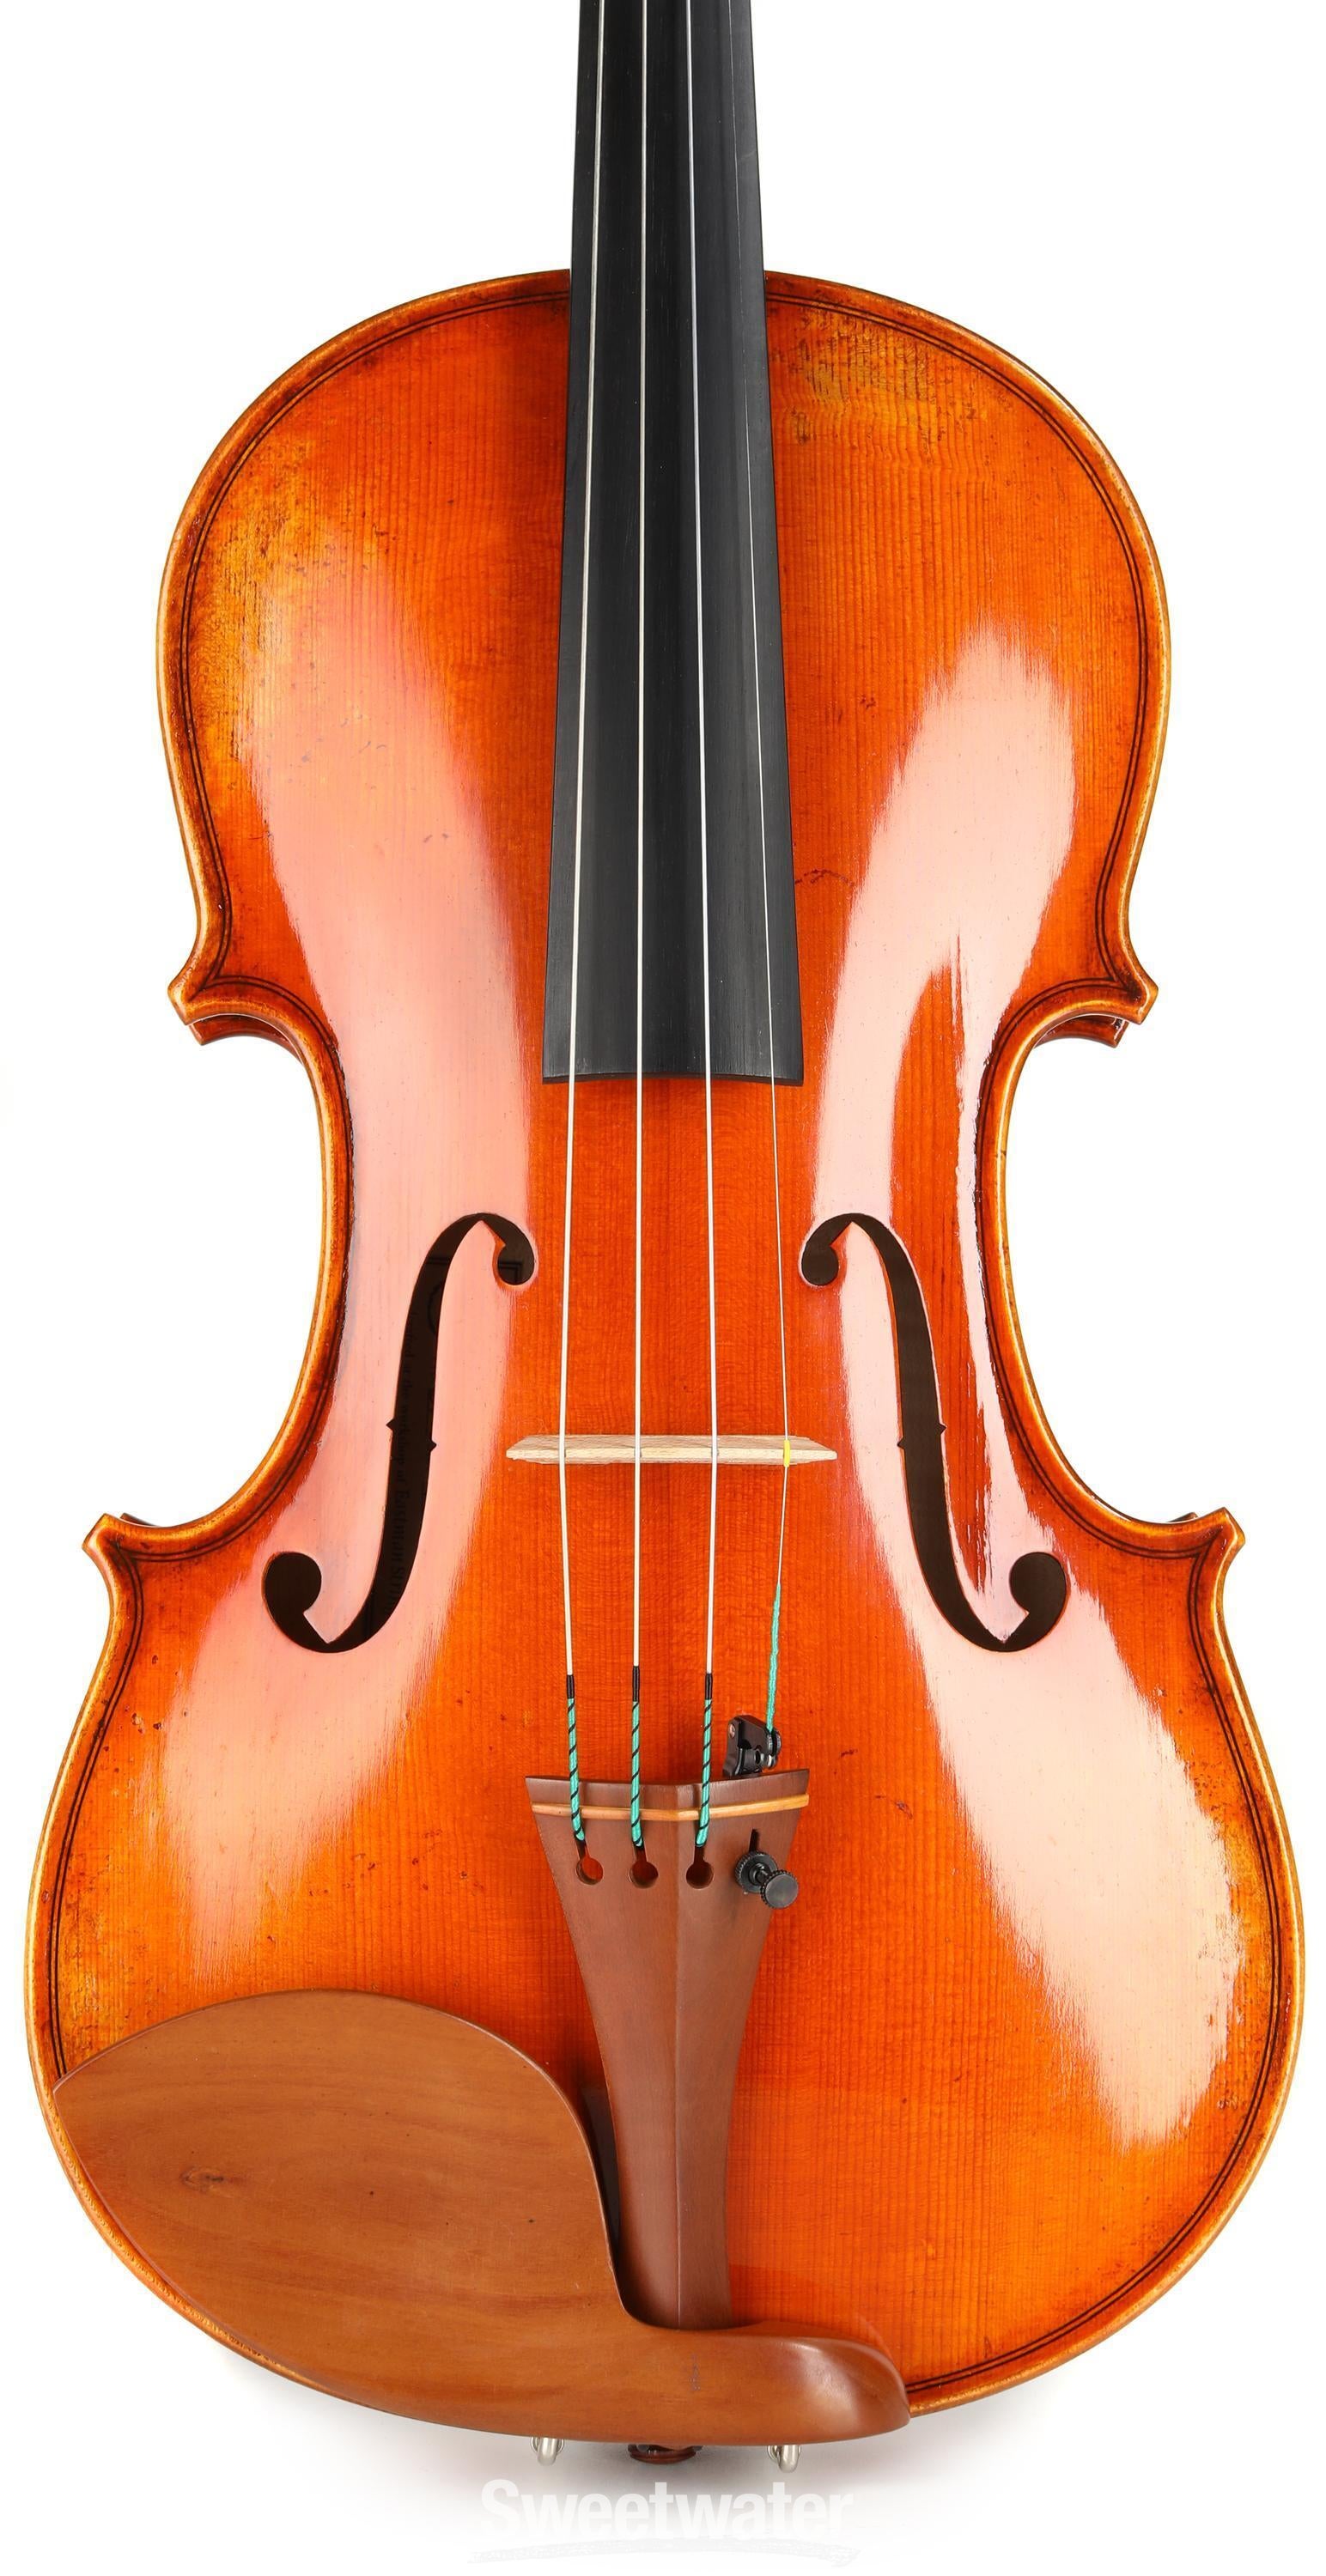 Eastman Master VL906 Professional Violin - 4/4 Size | Sweetwater